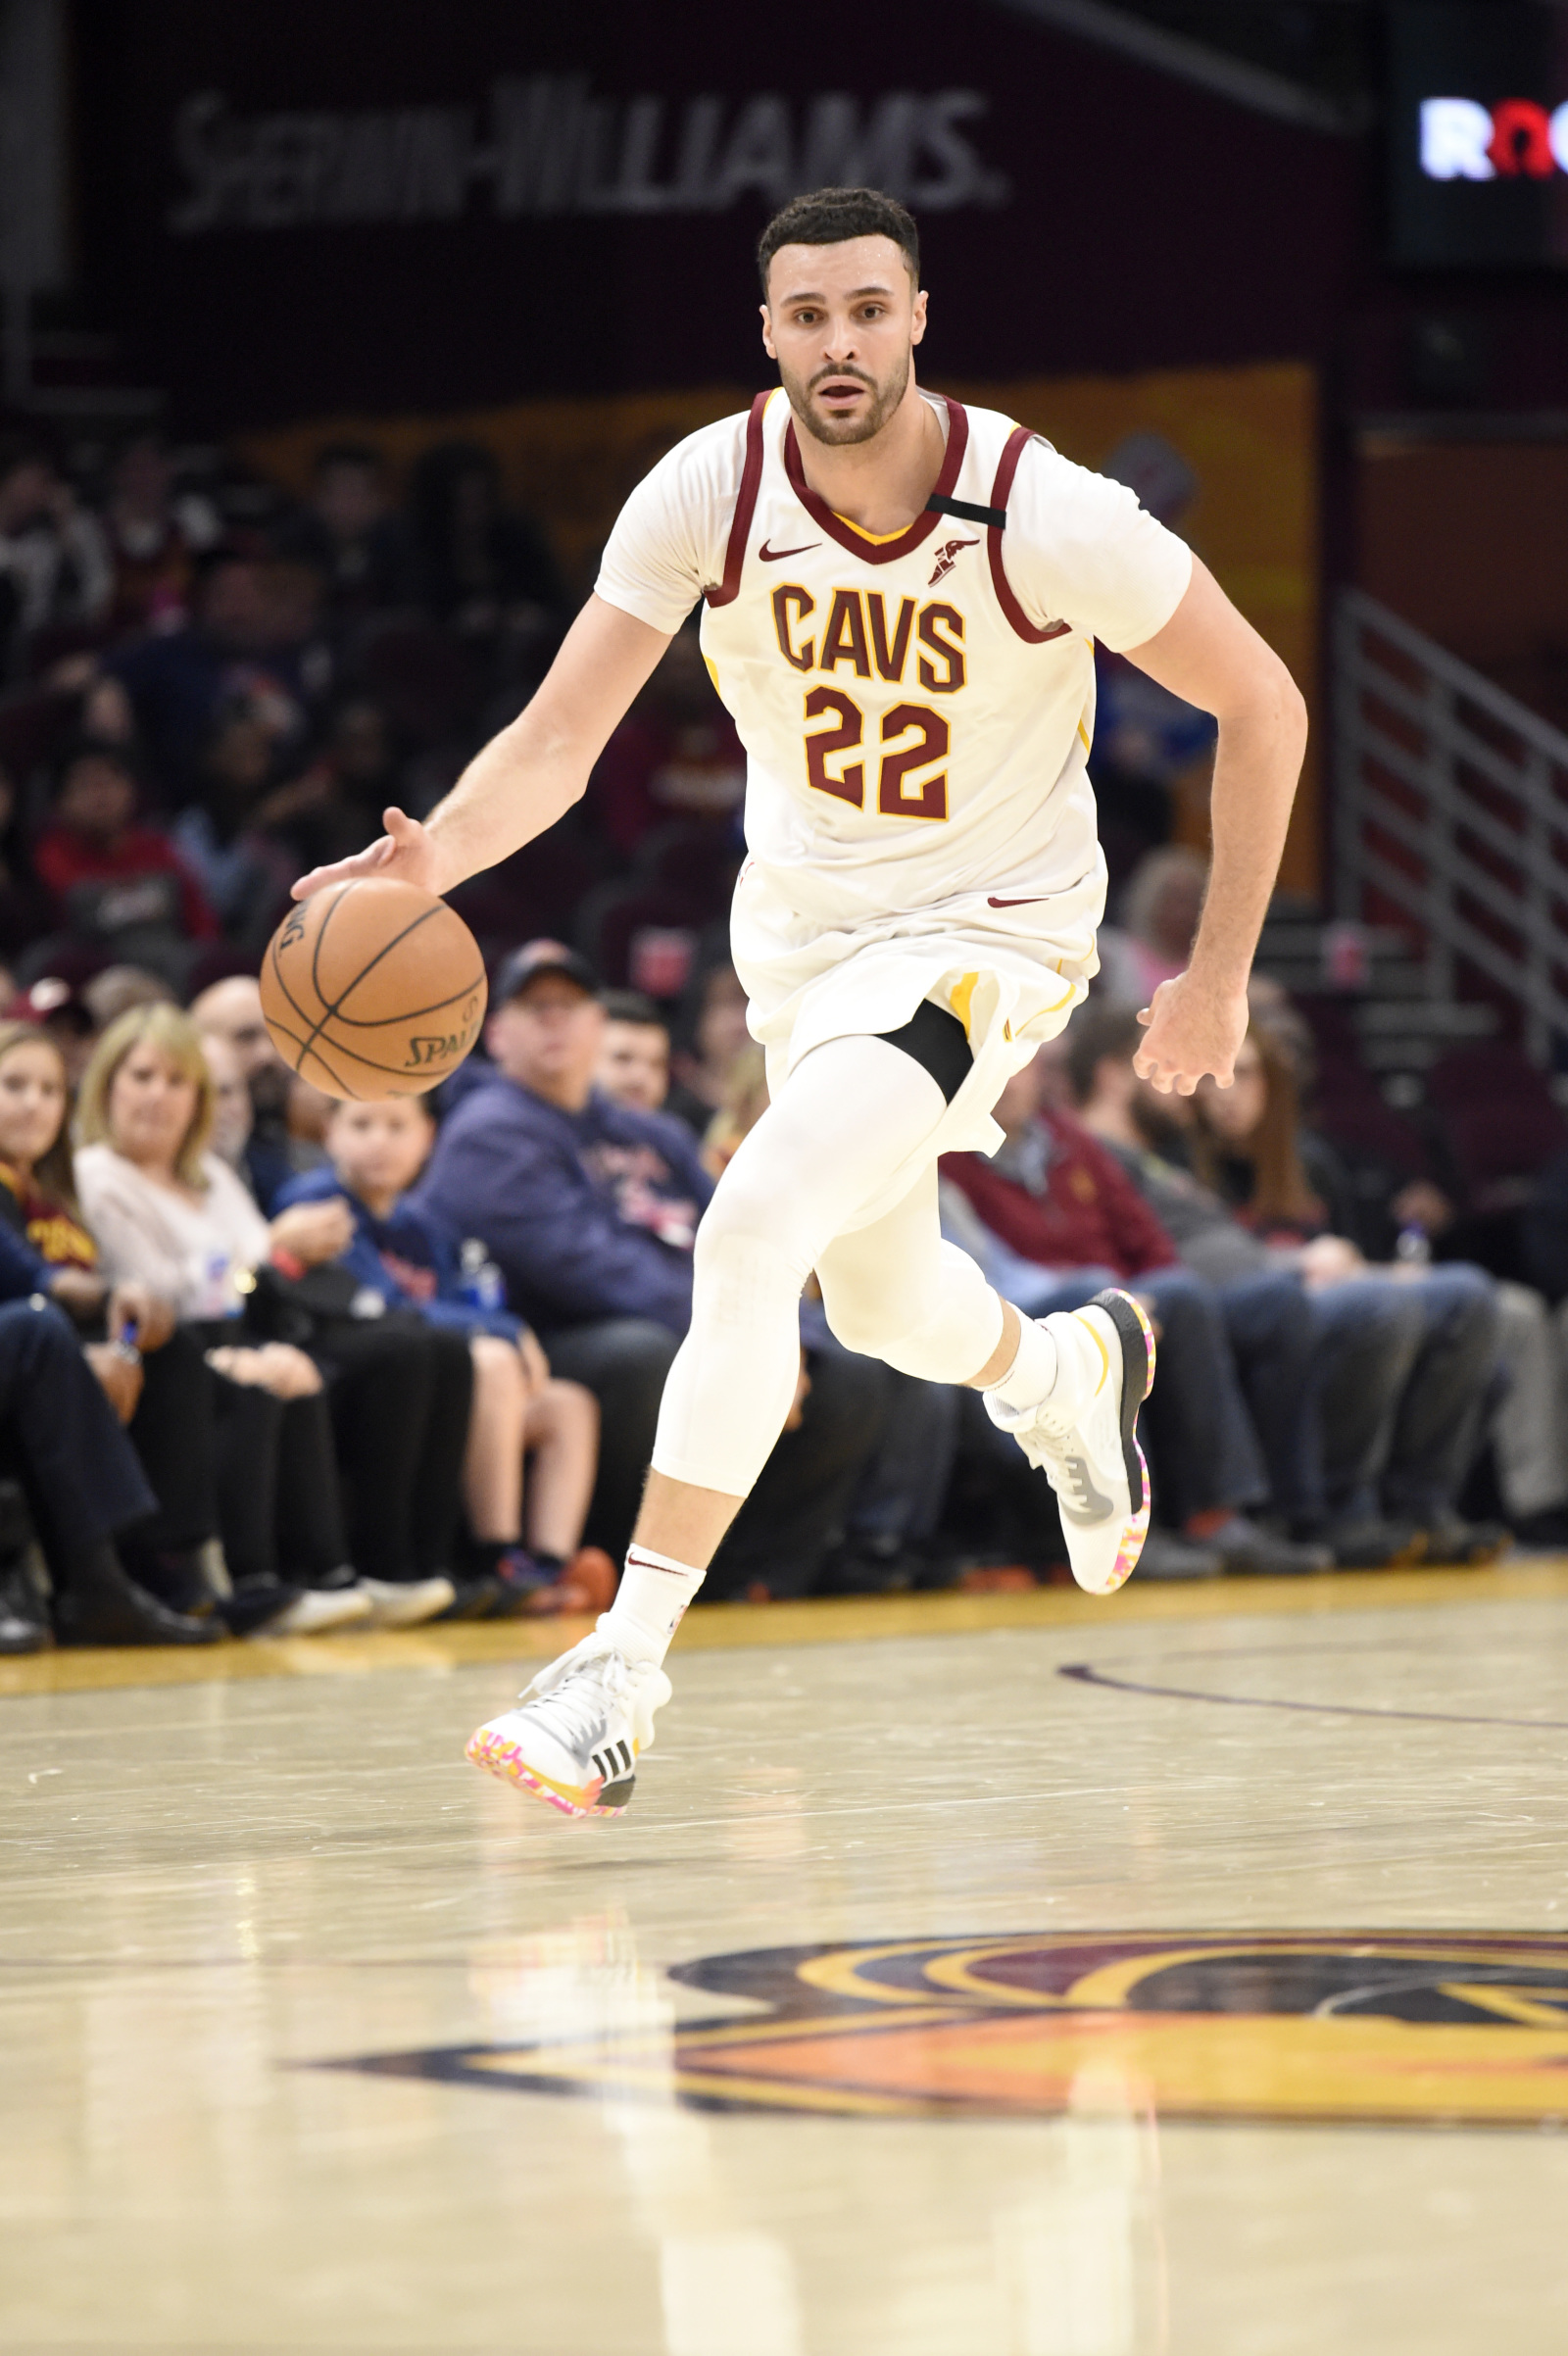 Larry Nance Jr. to wear his dad's retired No. 22 with Cavs